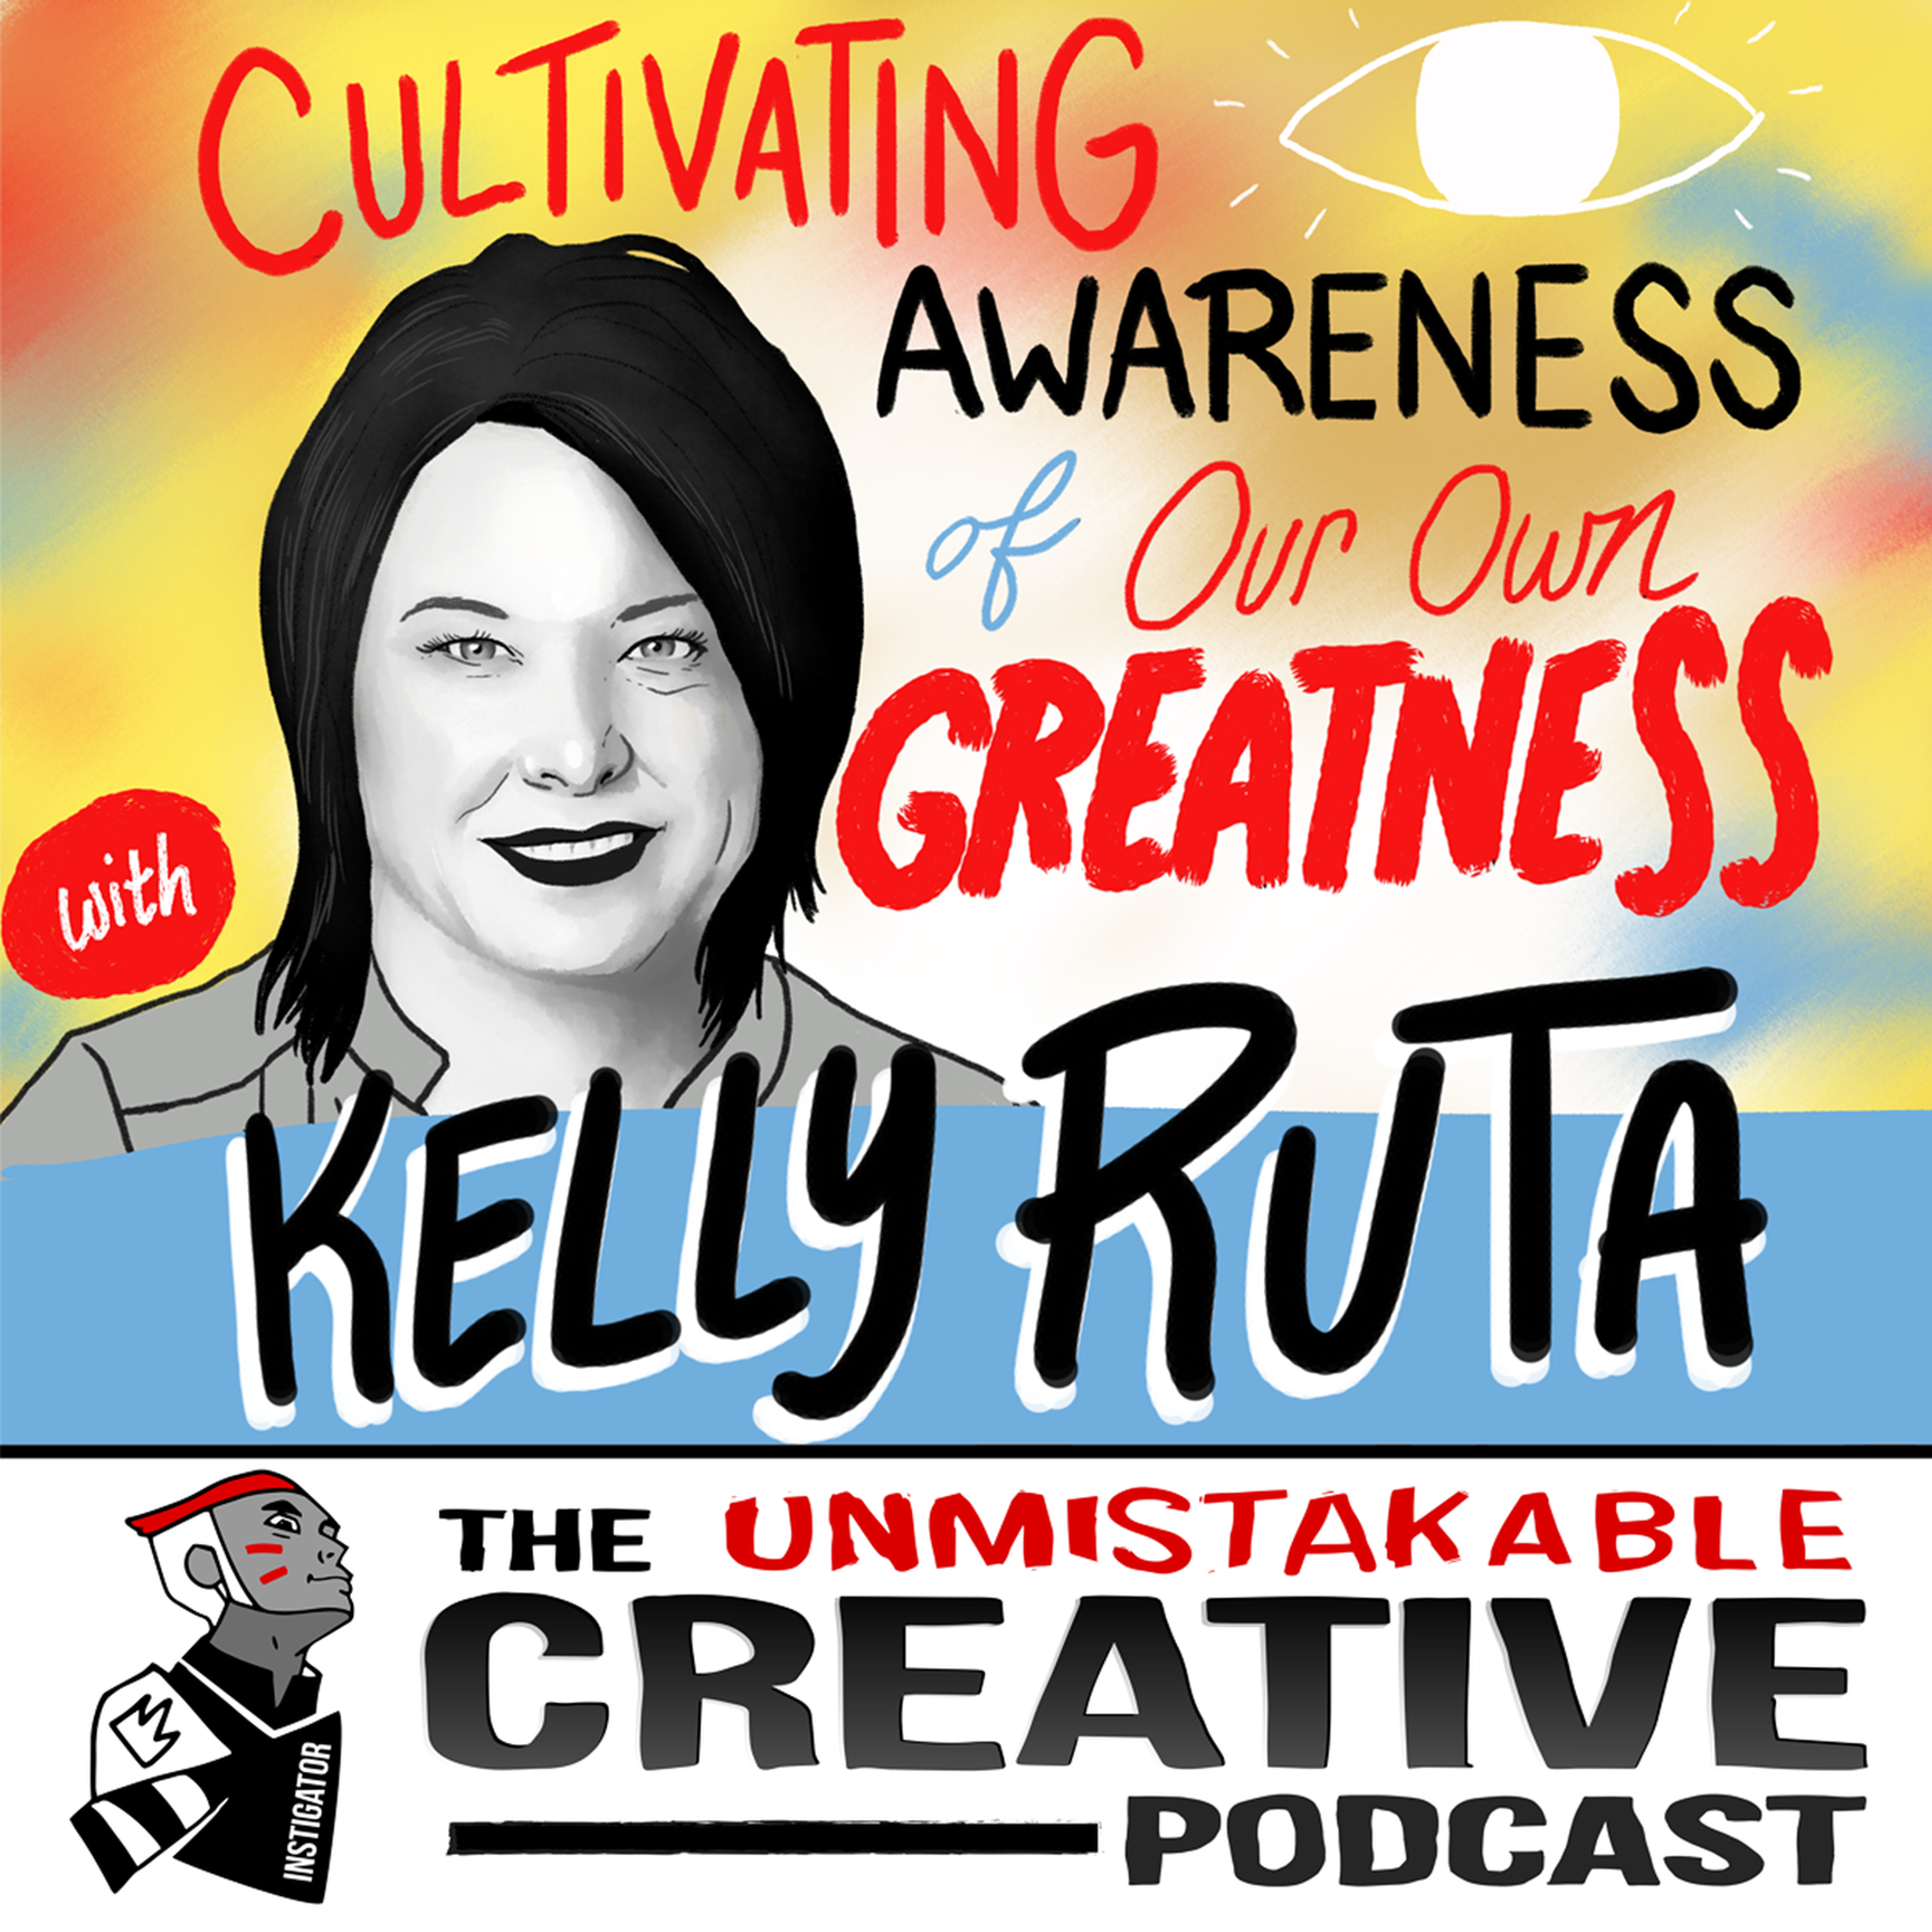 Kelly Ruta: Cultivating Awareness of Our Own Greatness